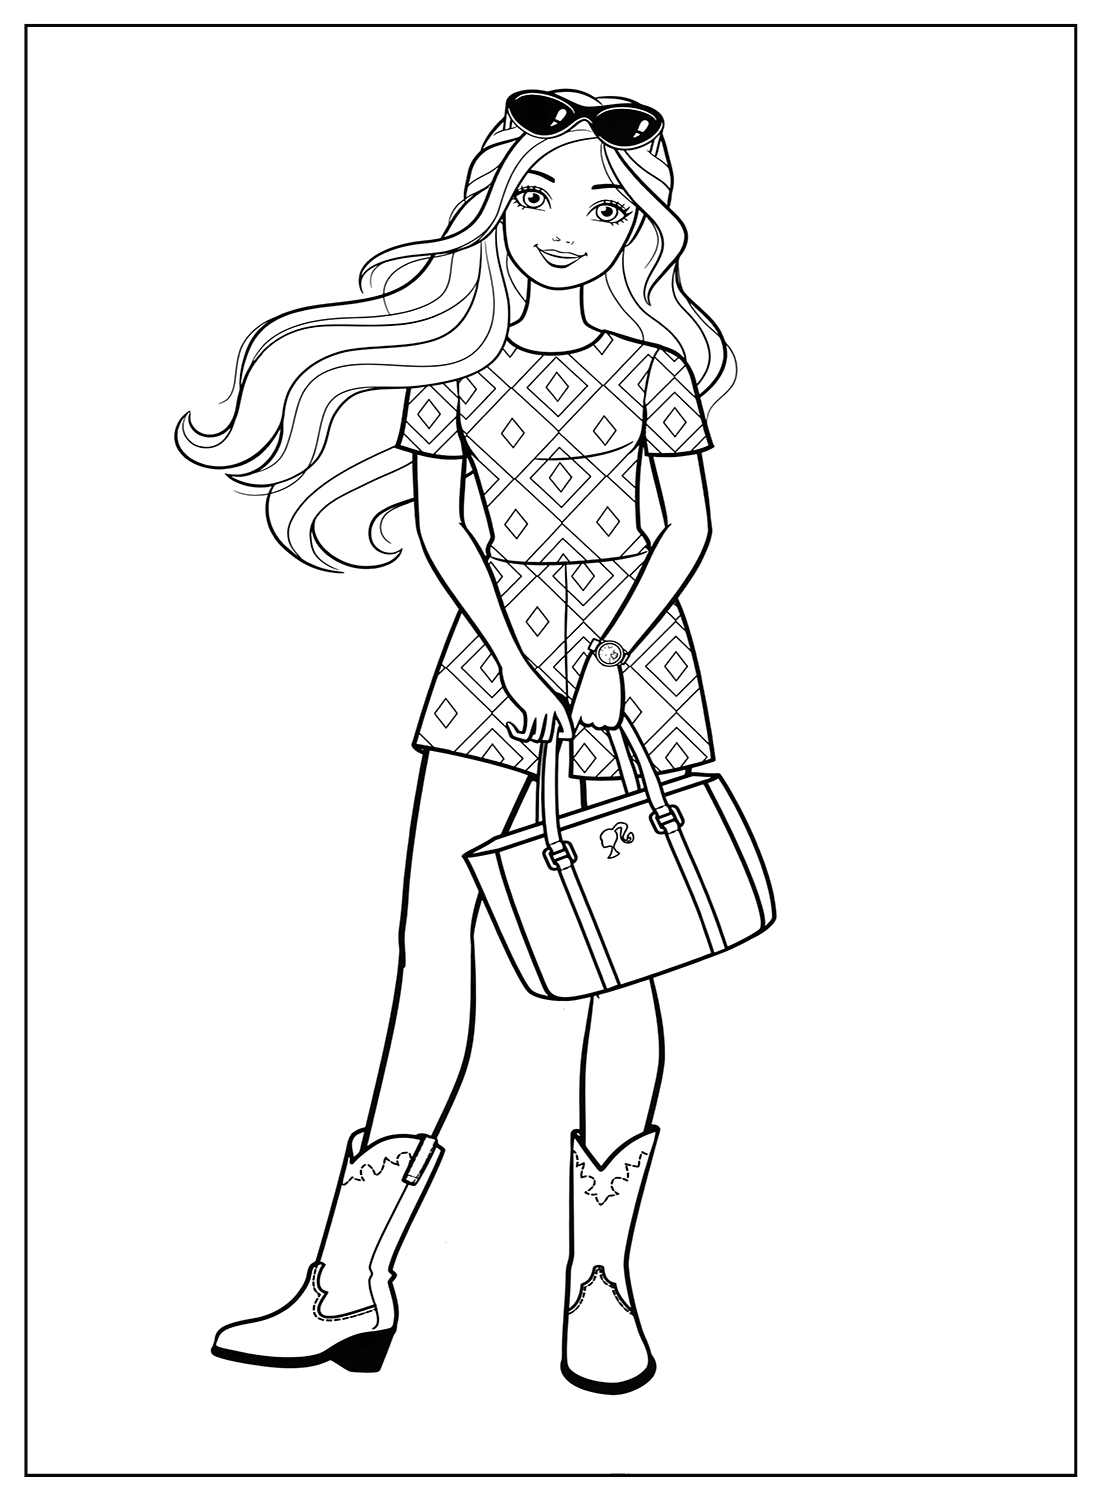 Barbie Coloring Sheets from Barbie